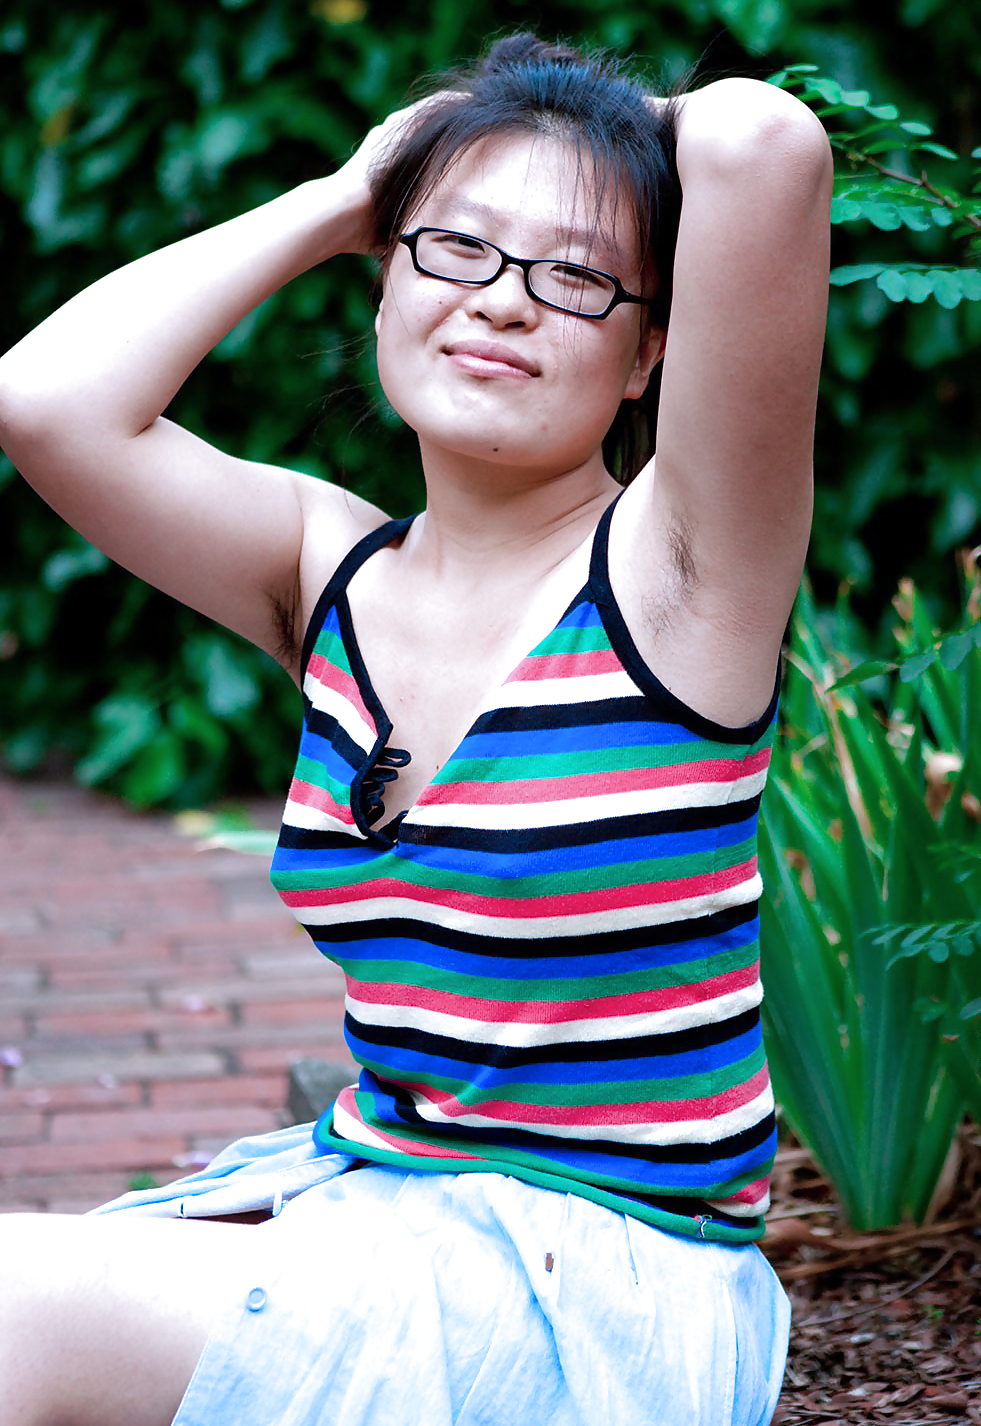 Nudity (Asians with Hairy Armpits & Pubic Hair) #36972573